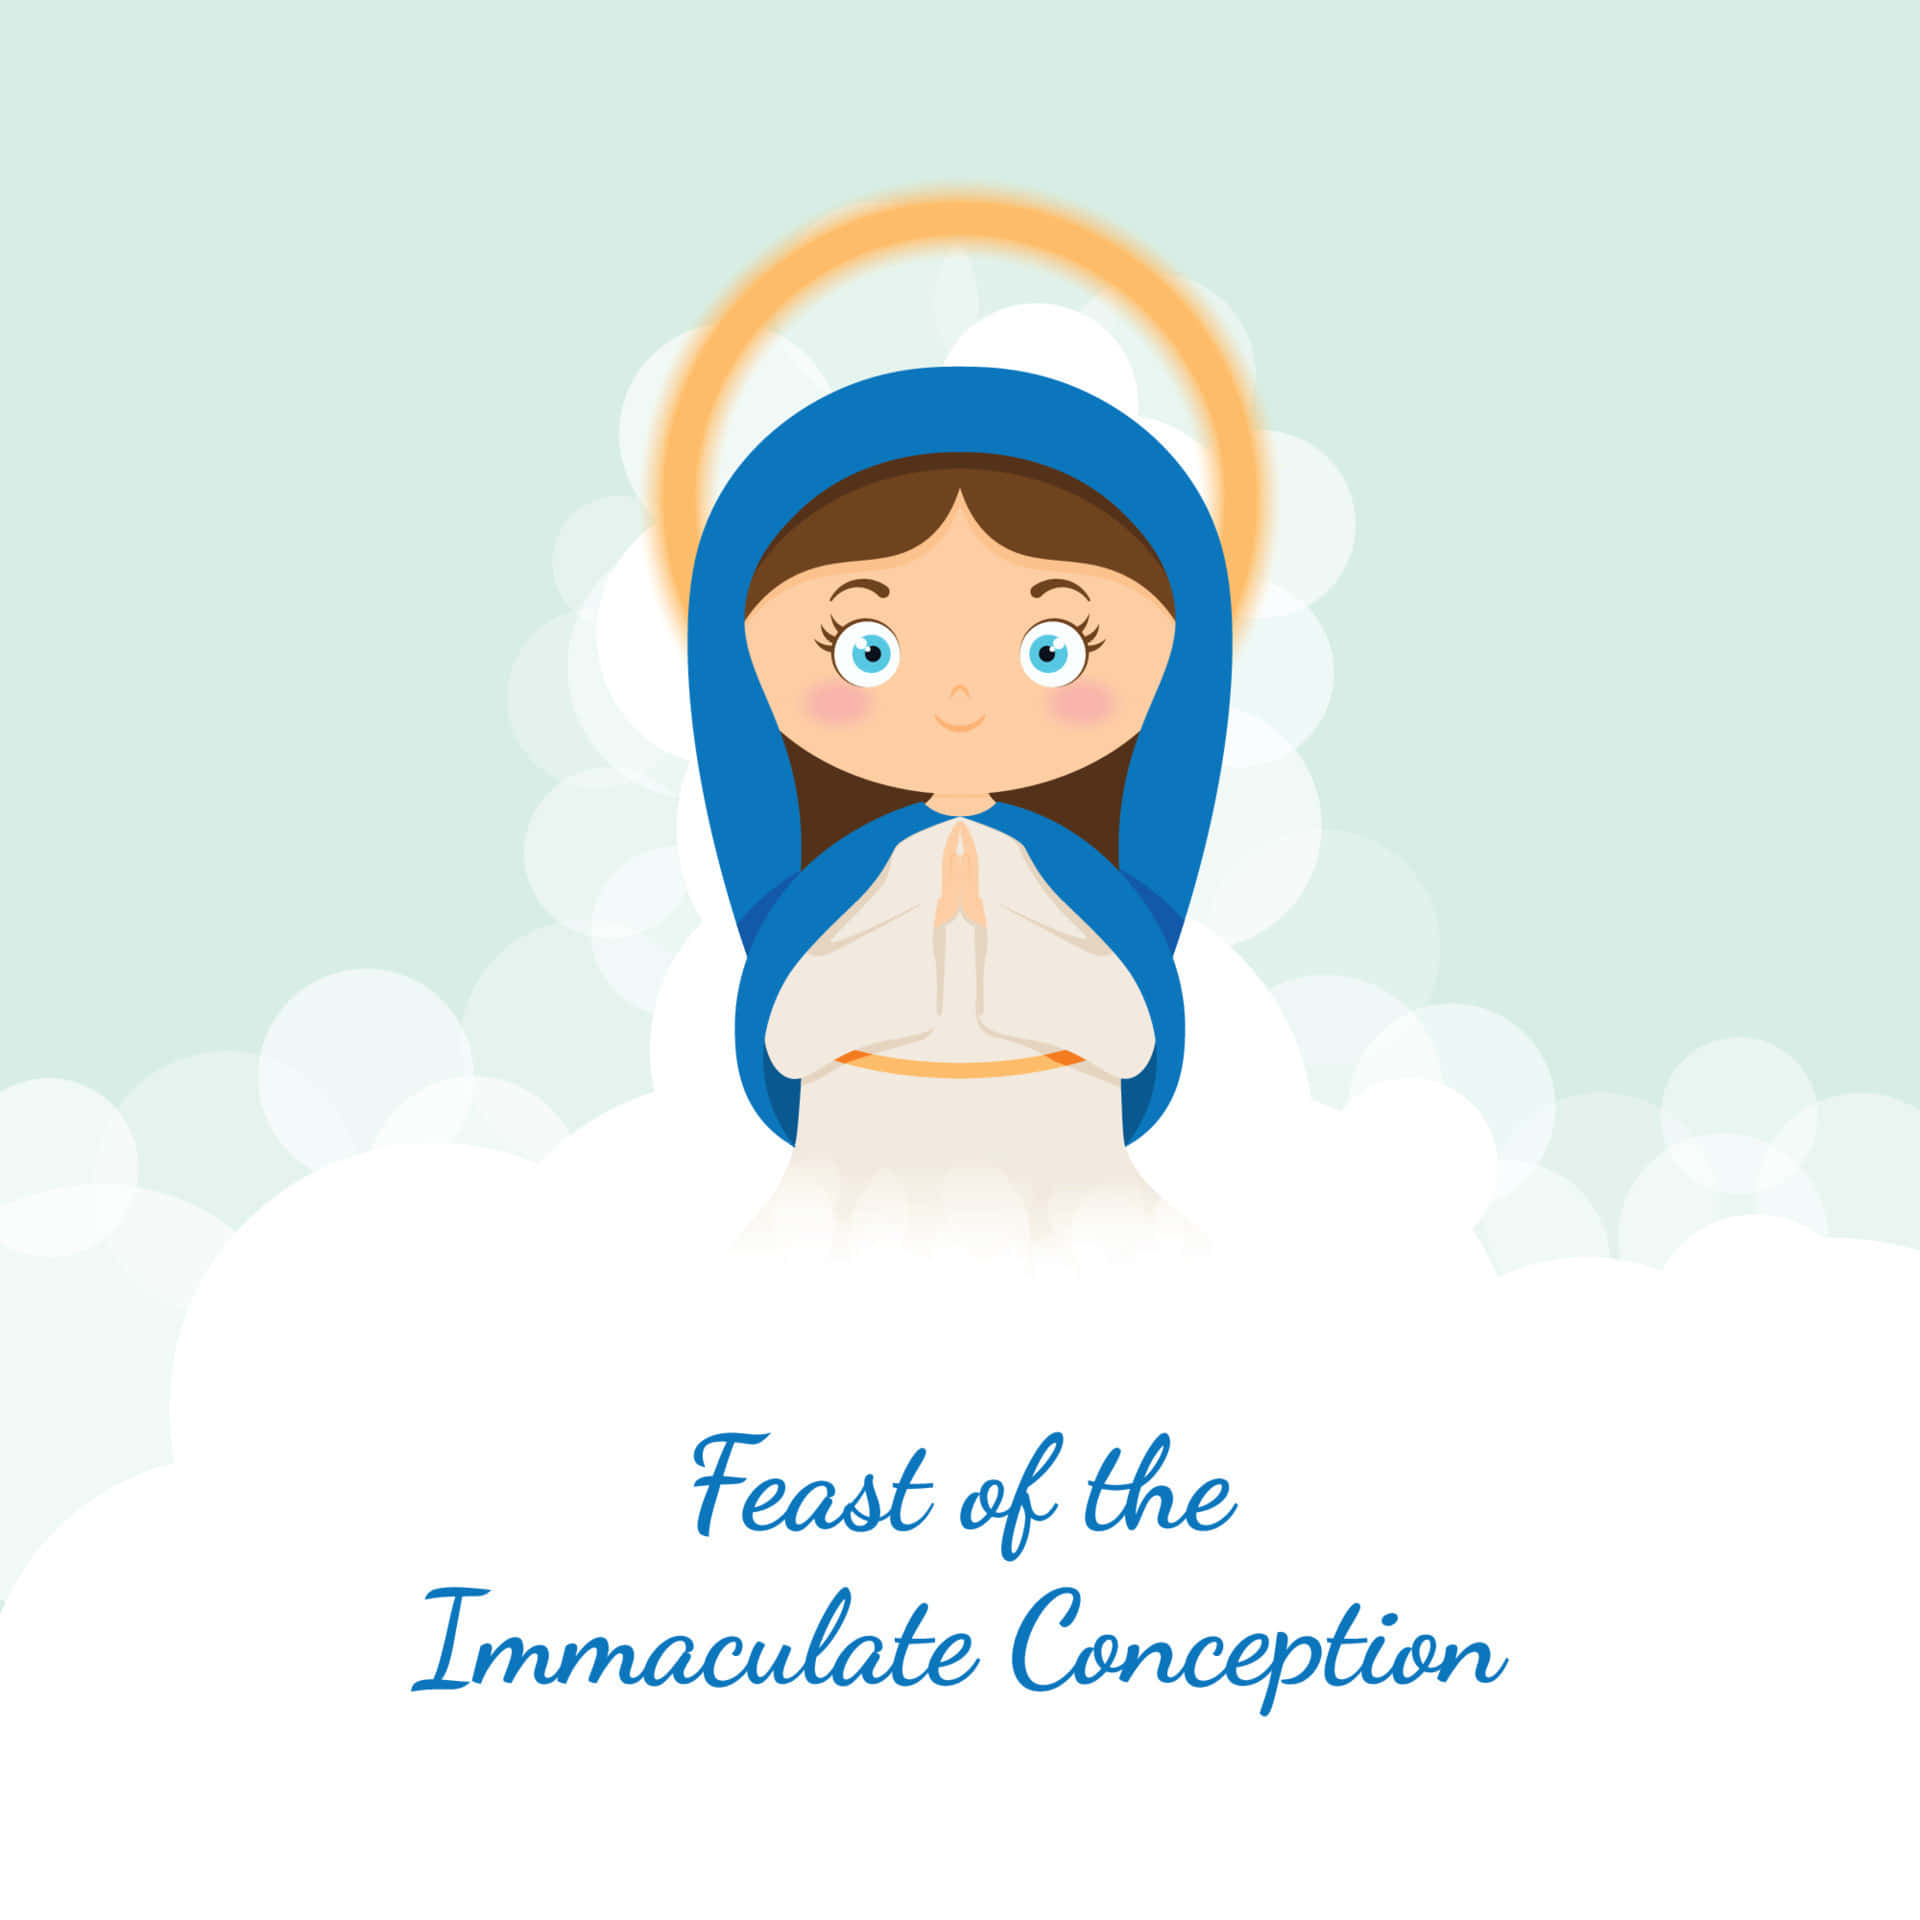 Cute Immaculate Conception Art Wallpaper